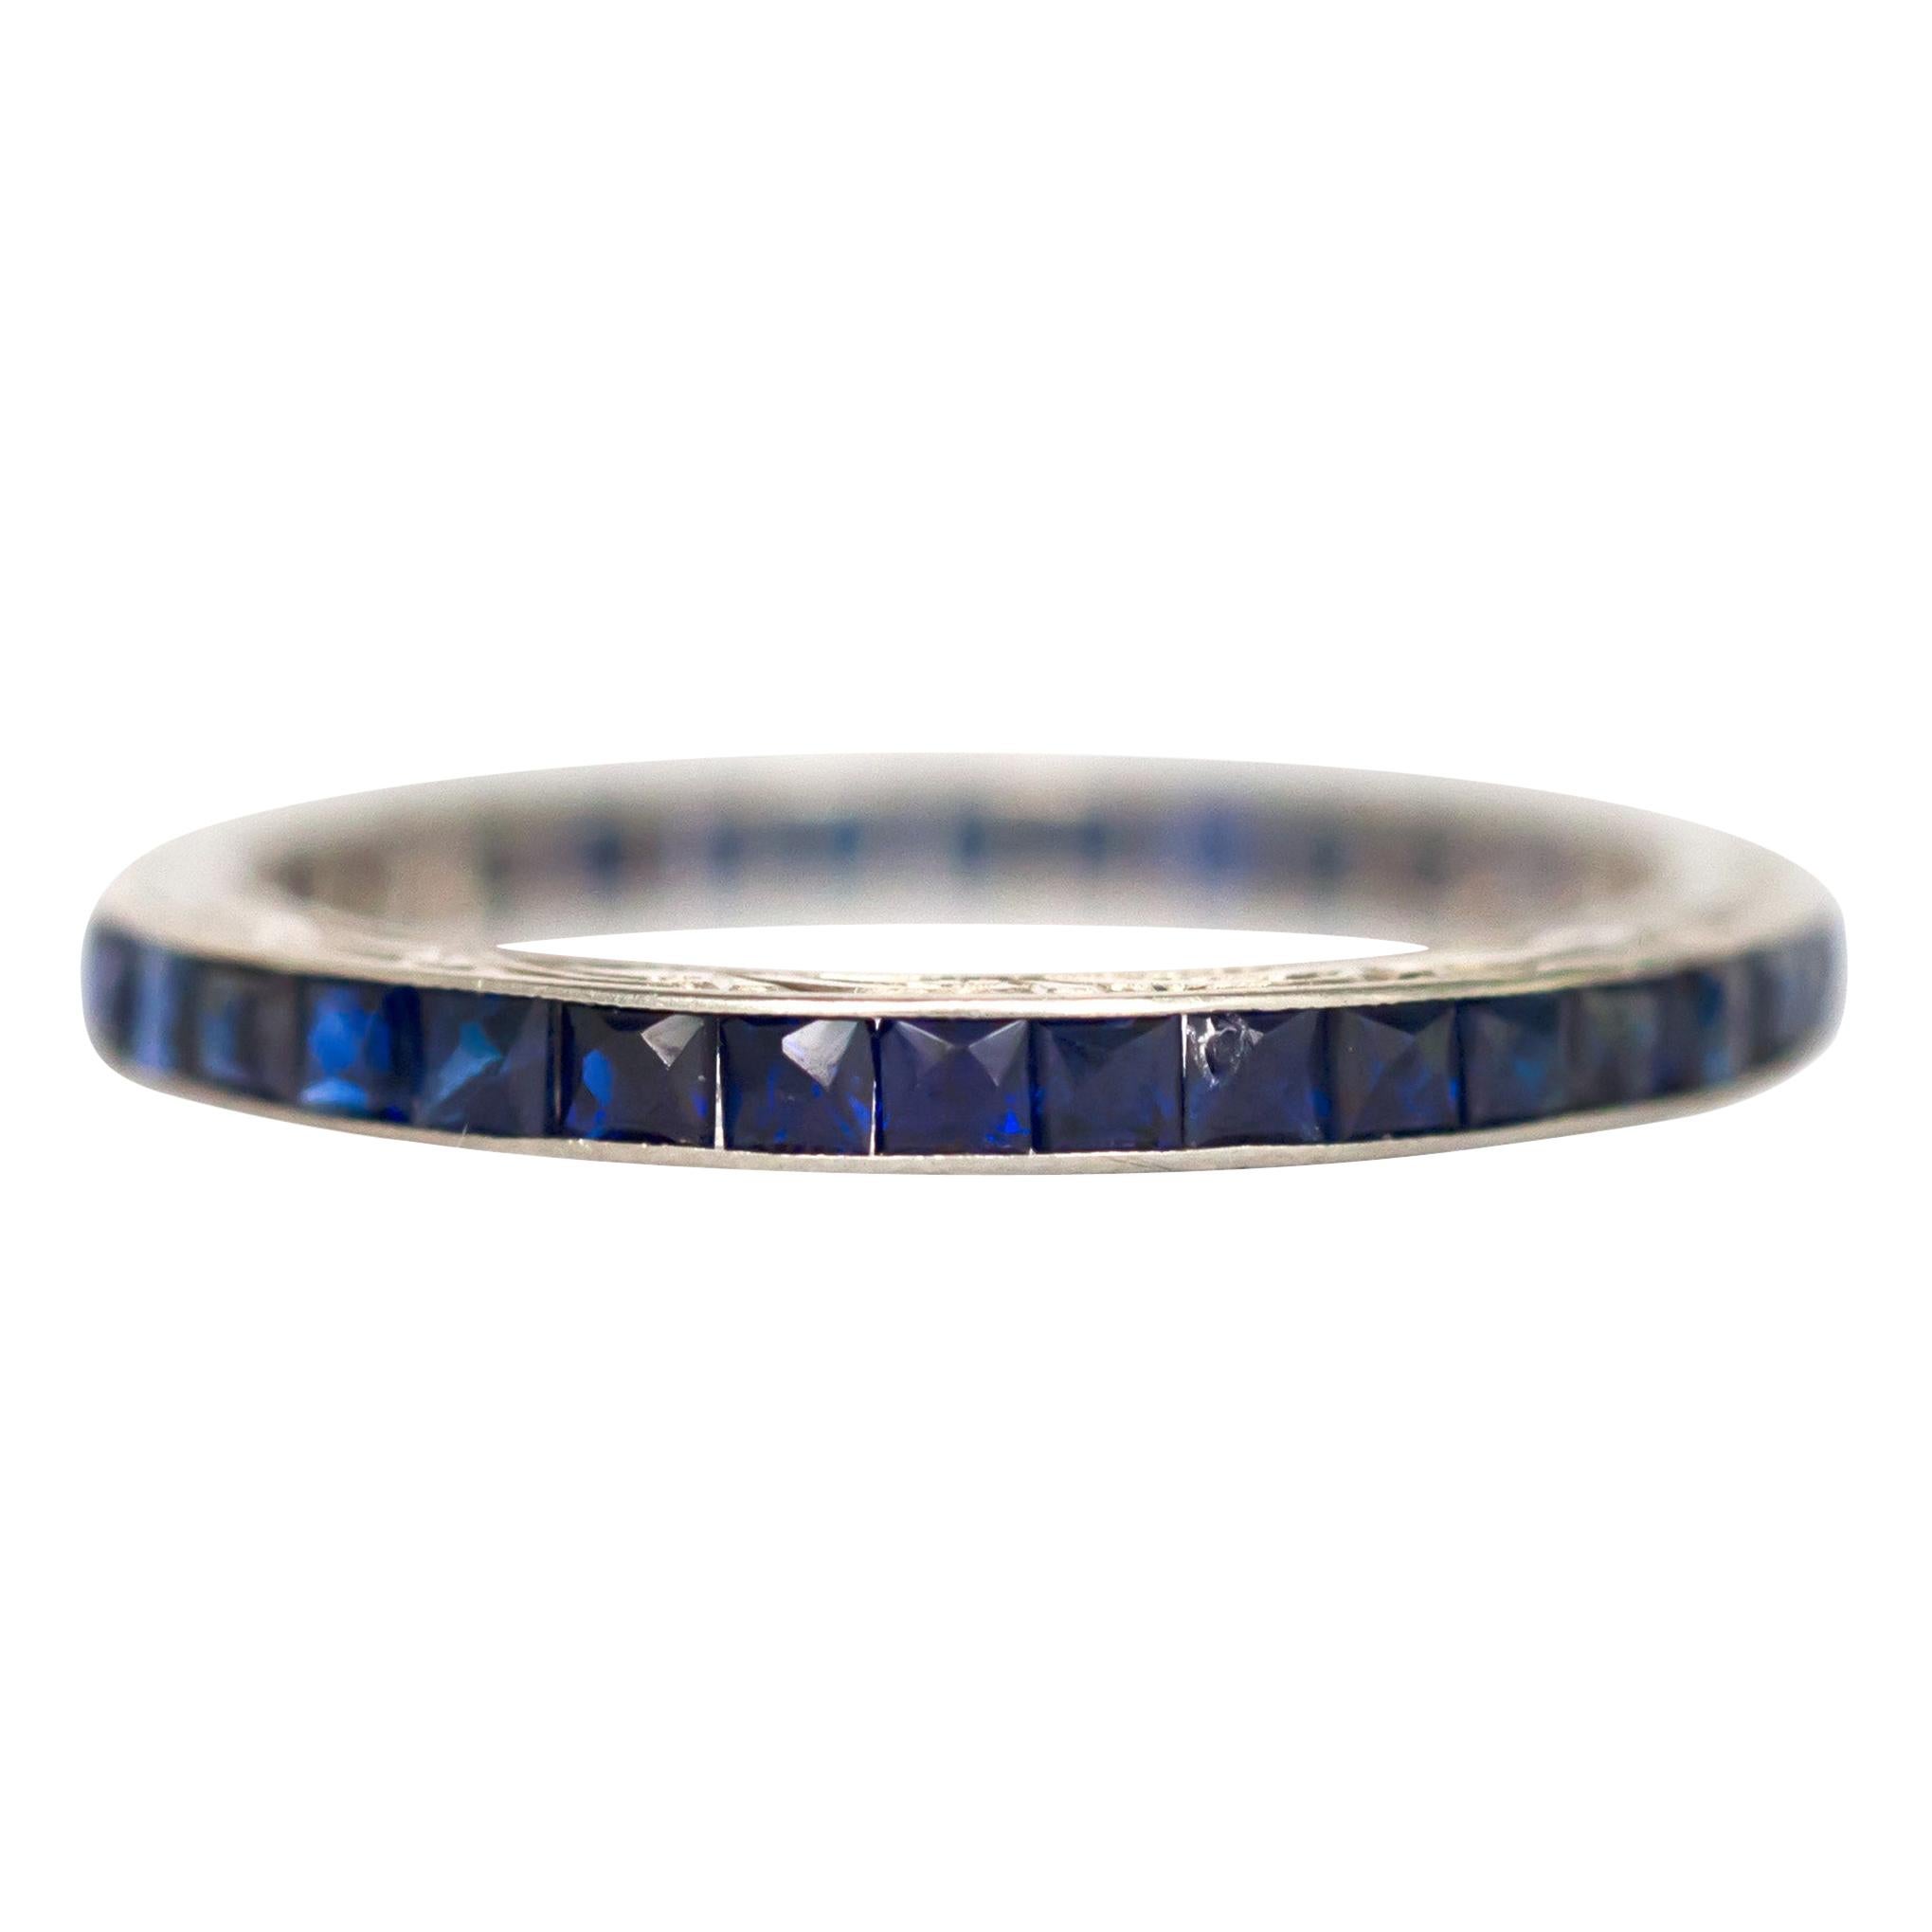 1.00 Carat Total Weight Sapphire White Gold Wedding Band